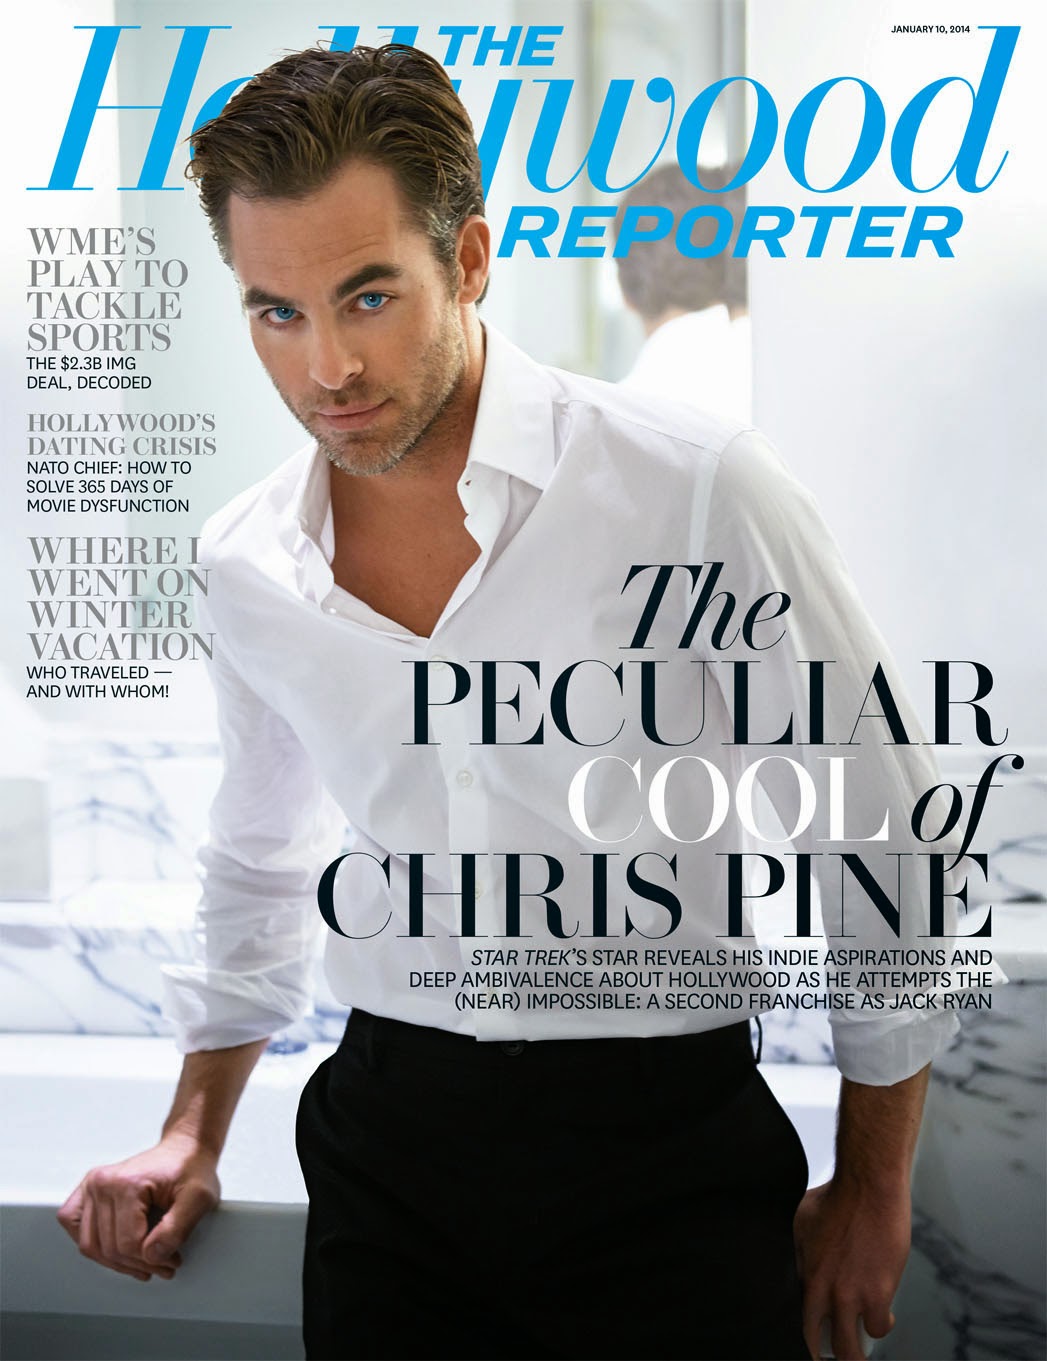 kenneth in the (212): Chris Pine Branches Out